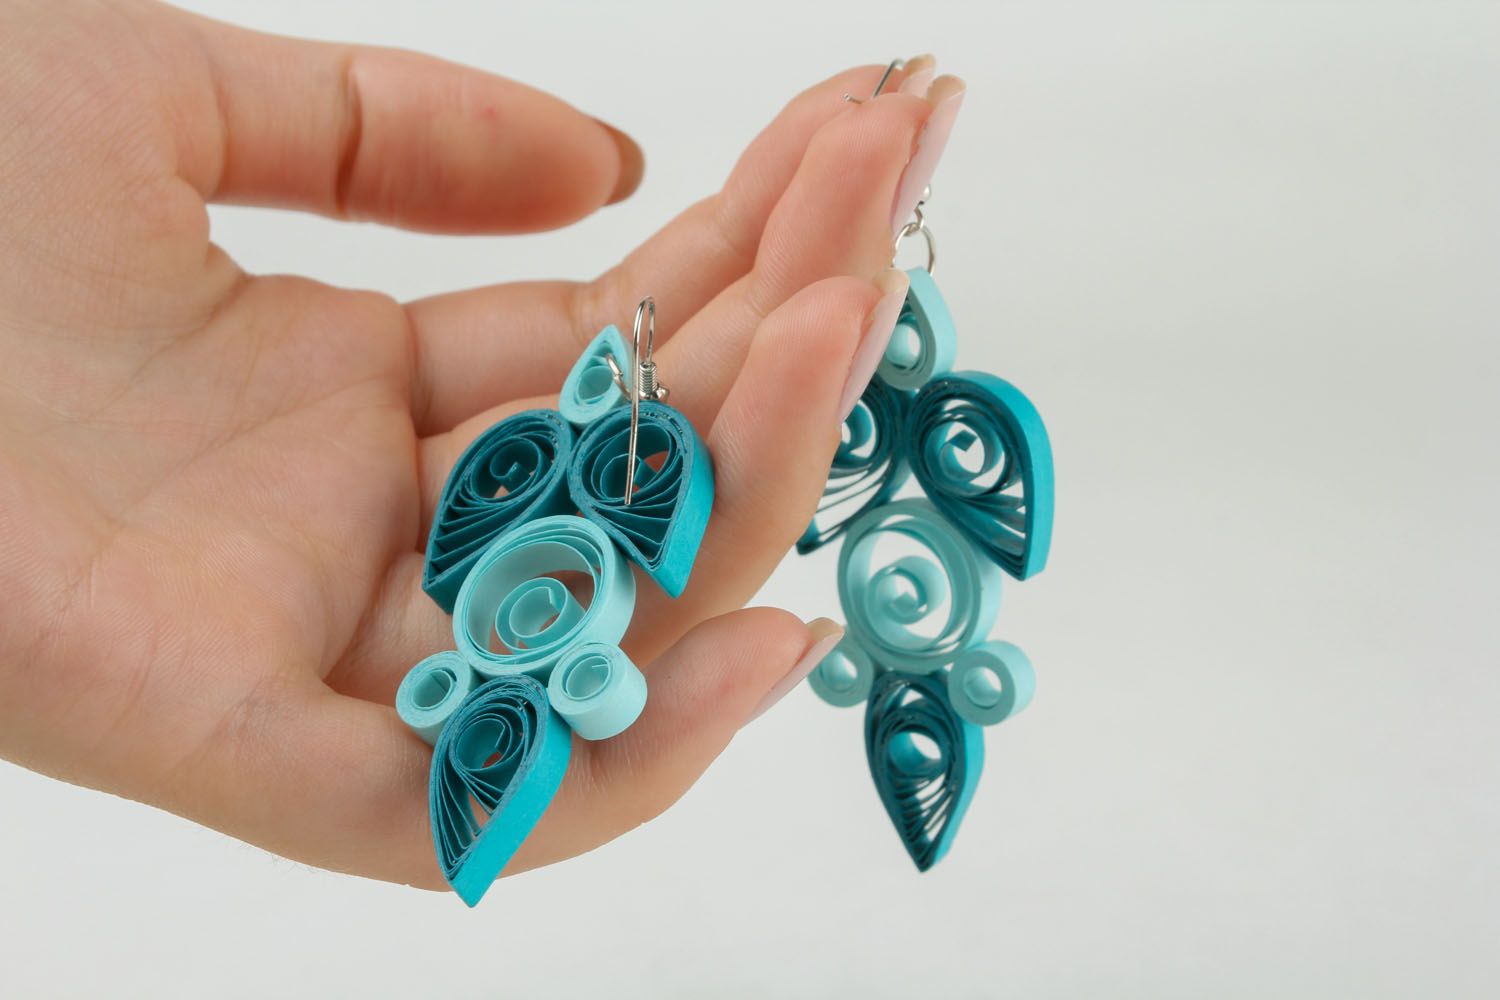 Large earrings made using quilling technique photo 5